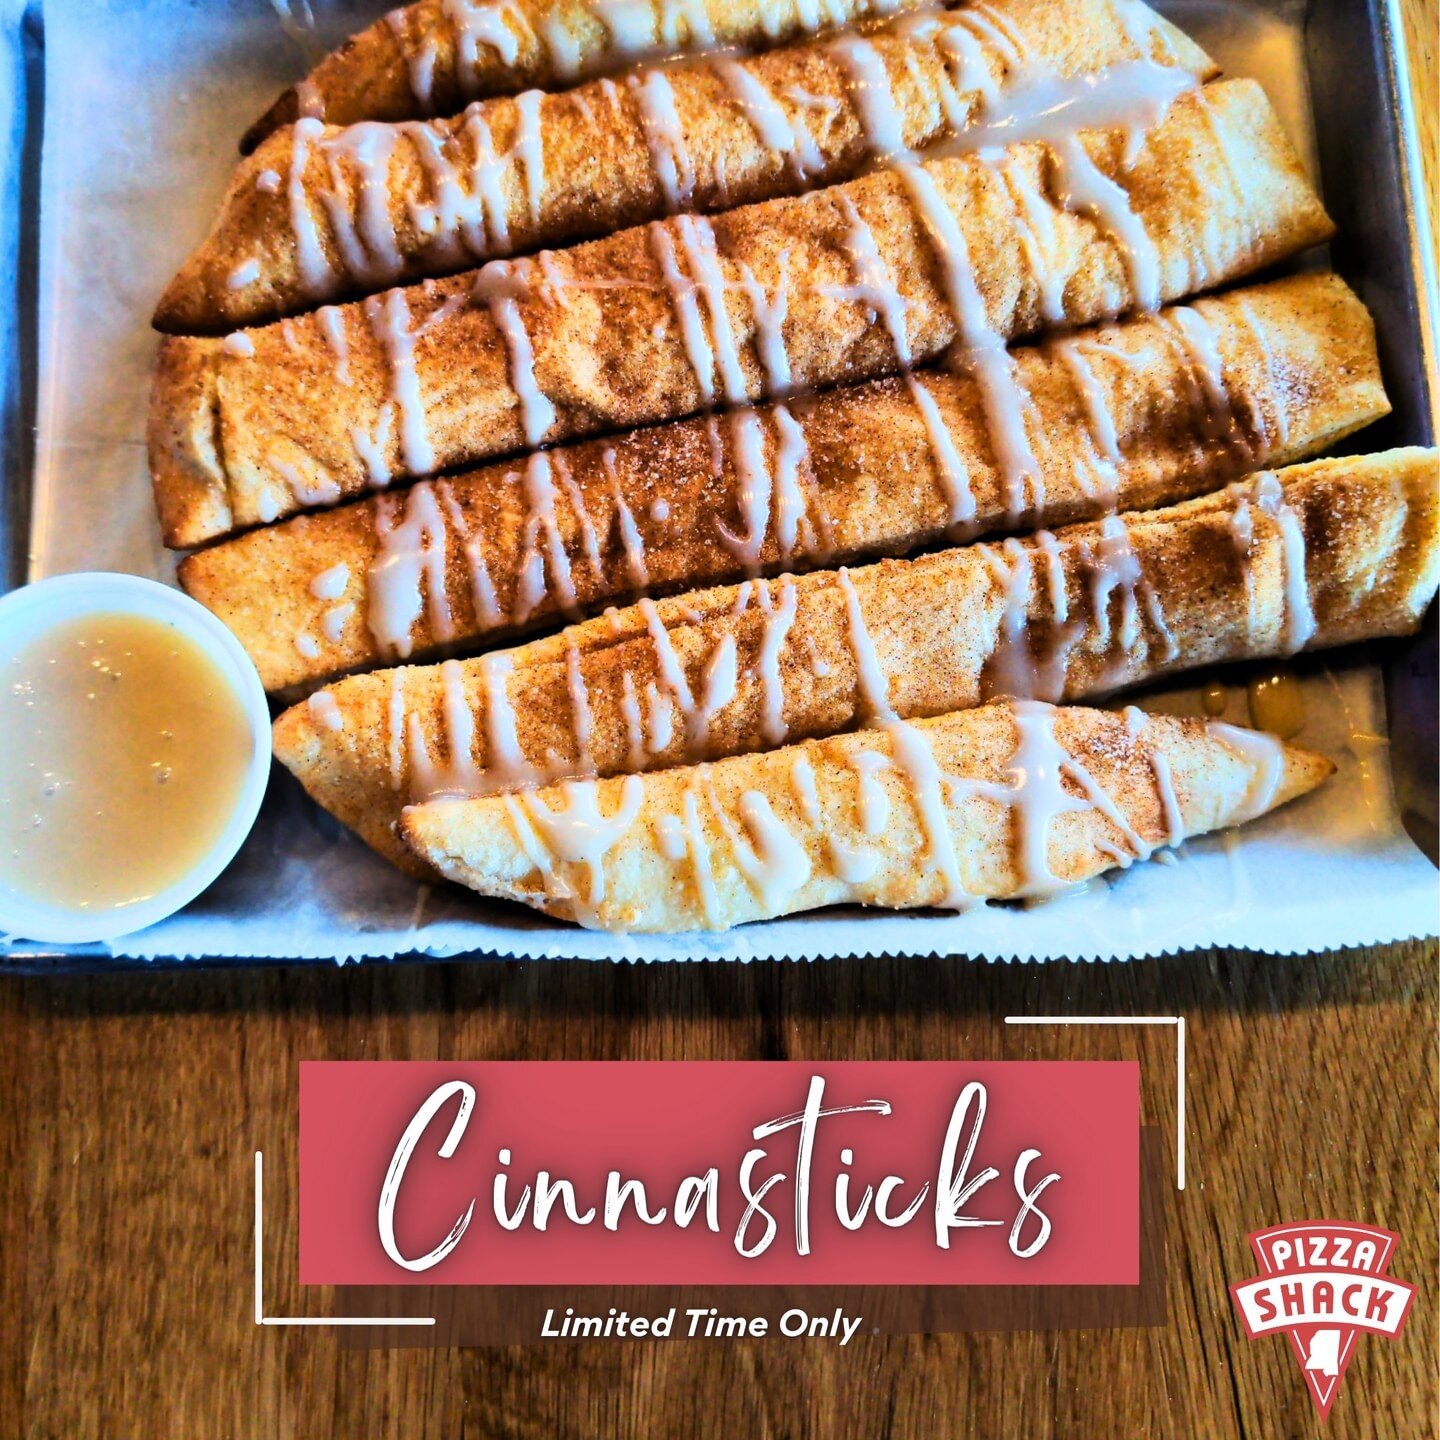 Calling all sweet tooths! We have something special for you. Introducing our Cinnasticks &ndash; homemade breadsticks tossed in cinnamon sugar and drizzled with icing. The perfect dessert to share (or not) at only $7.

Who&rsquo;s up for trying out t